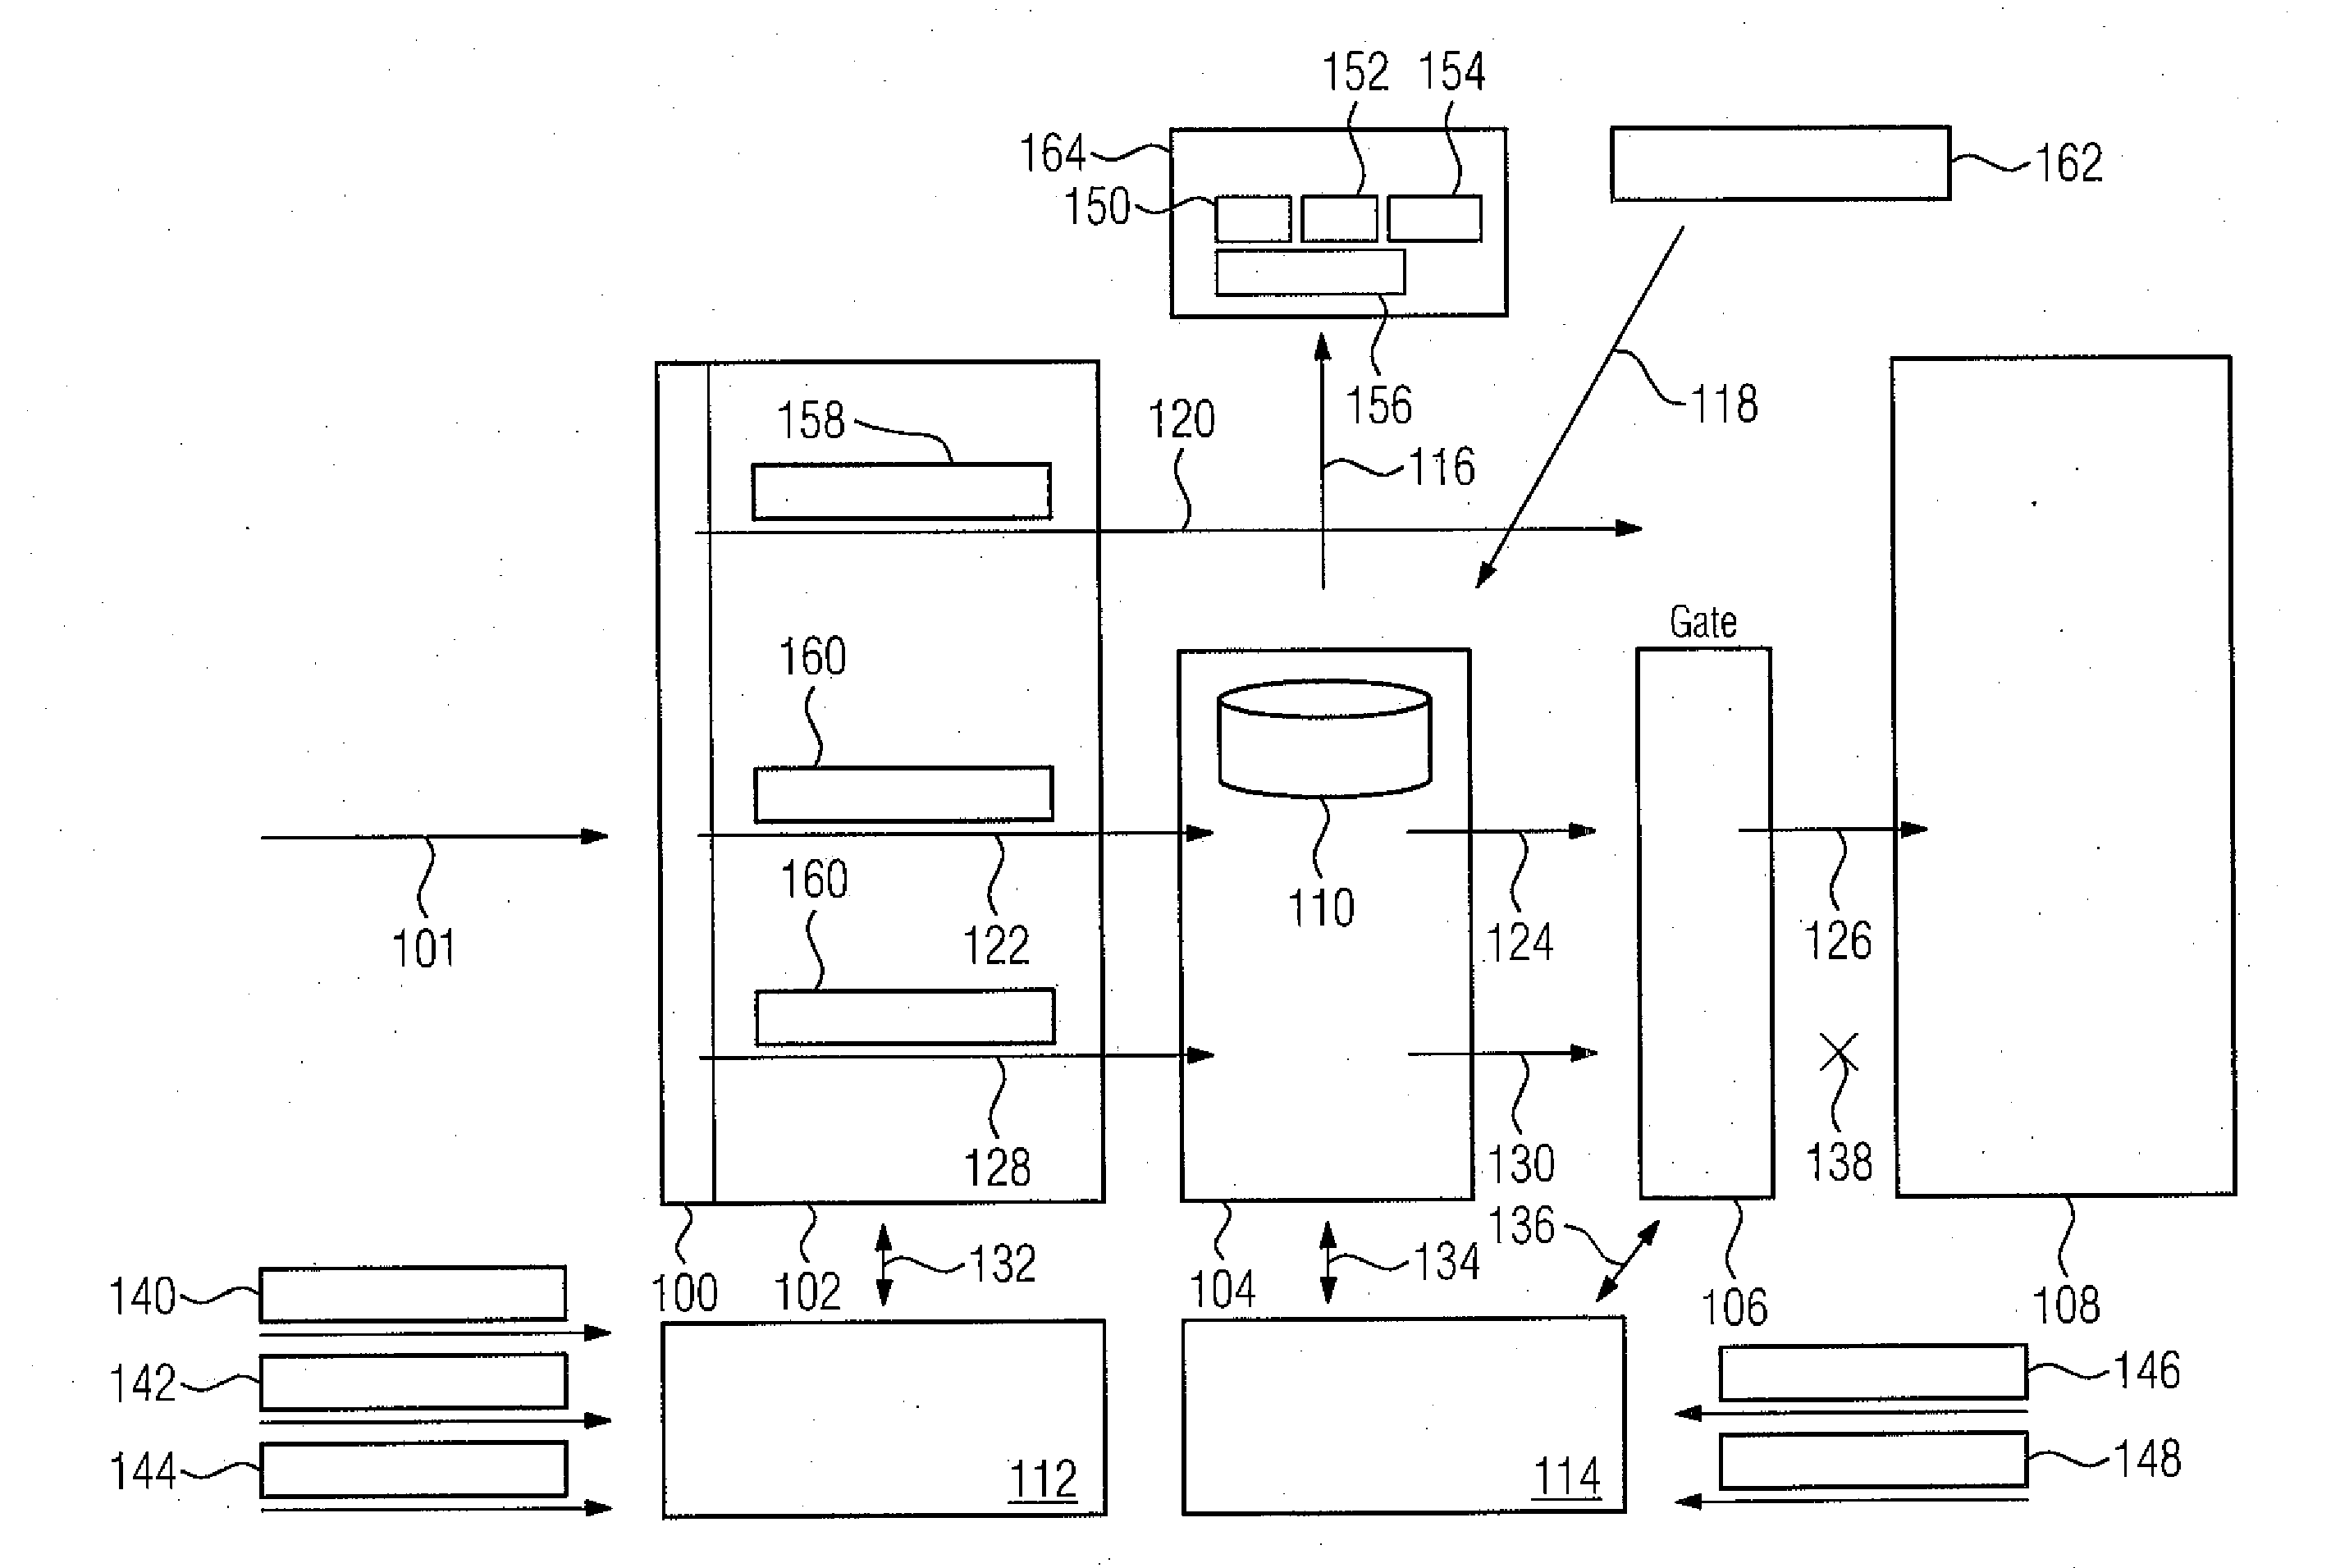 Computer-Implemented Method for Checking a Communication Input of a Programmable Logic Controller of an Automation Component of a Plant